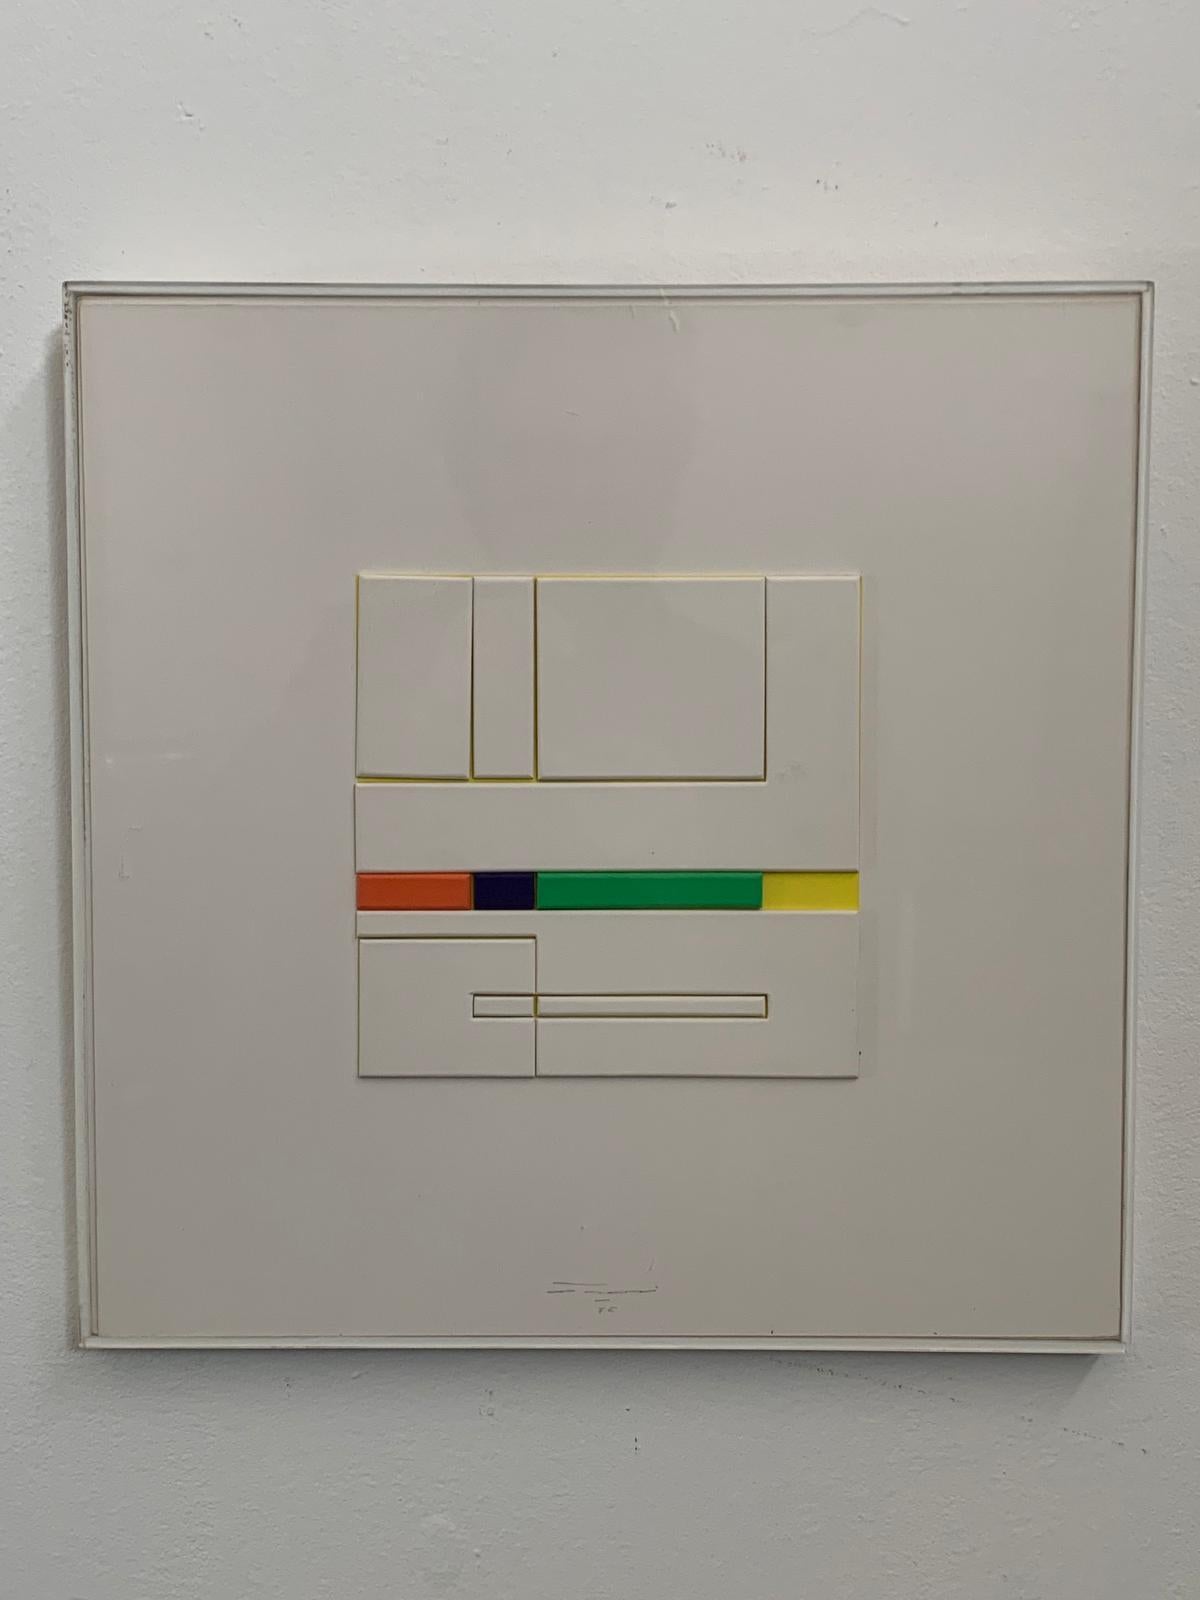 Alfredo Troisi, Evolution of the Square, 1975, Mixed Media on Cardboard For Sale 1